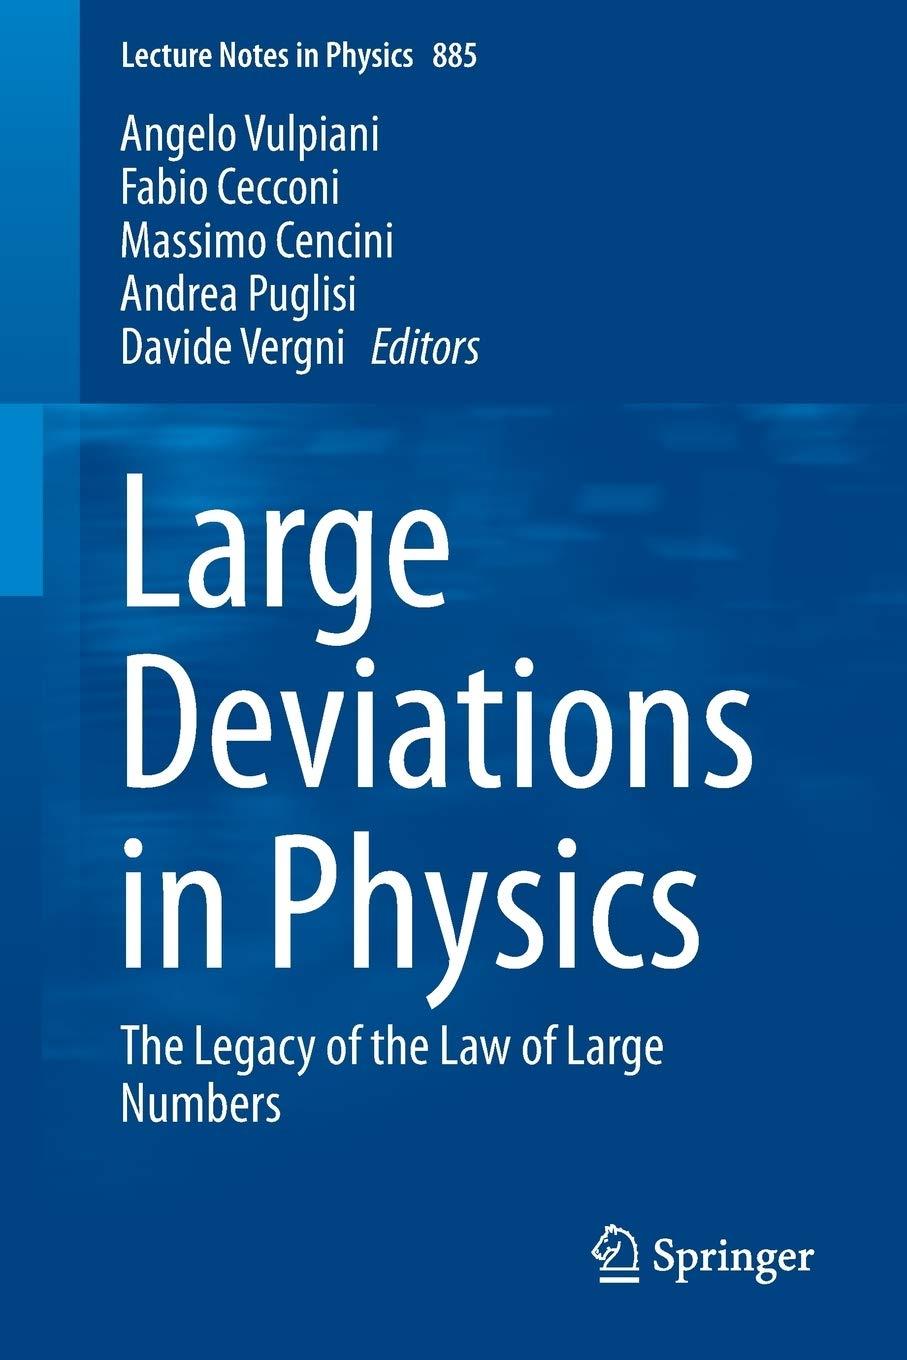 large deviations in physics the legacy of the law of large numbers 1st edition angelo vulpiani, fabio cecconi